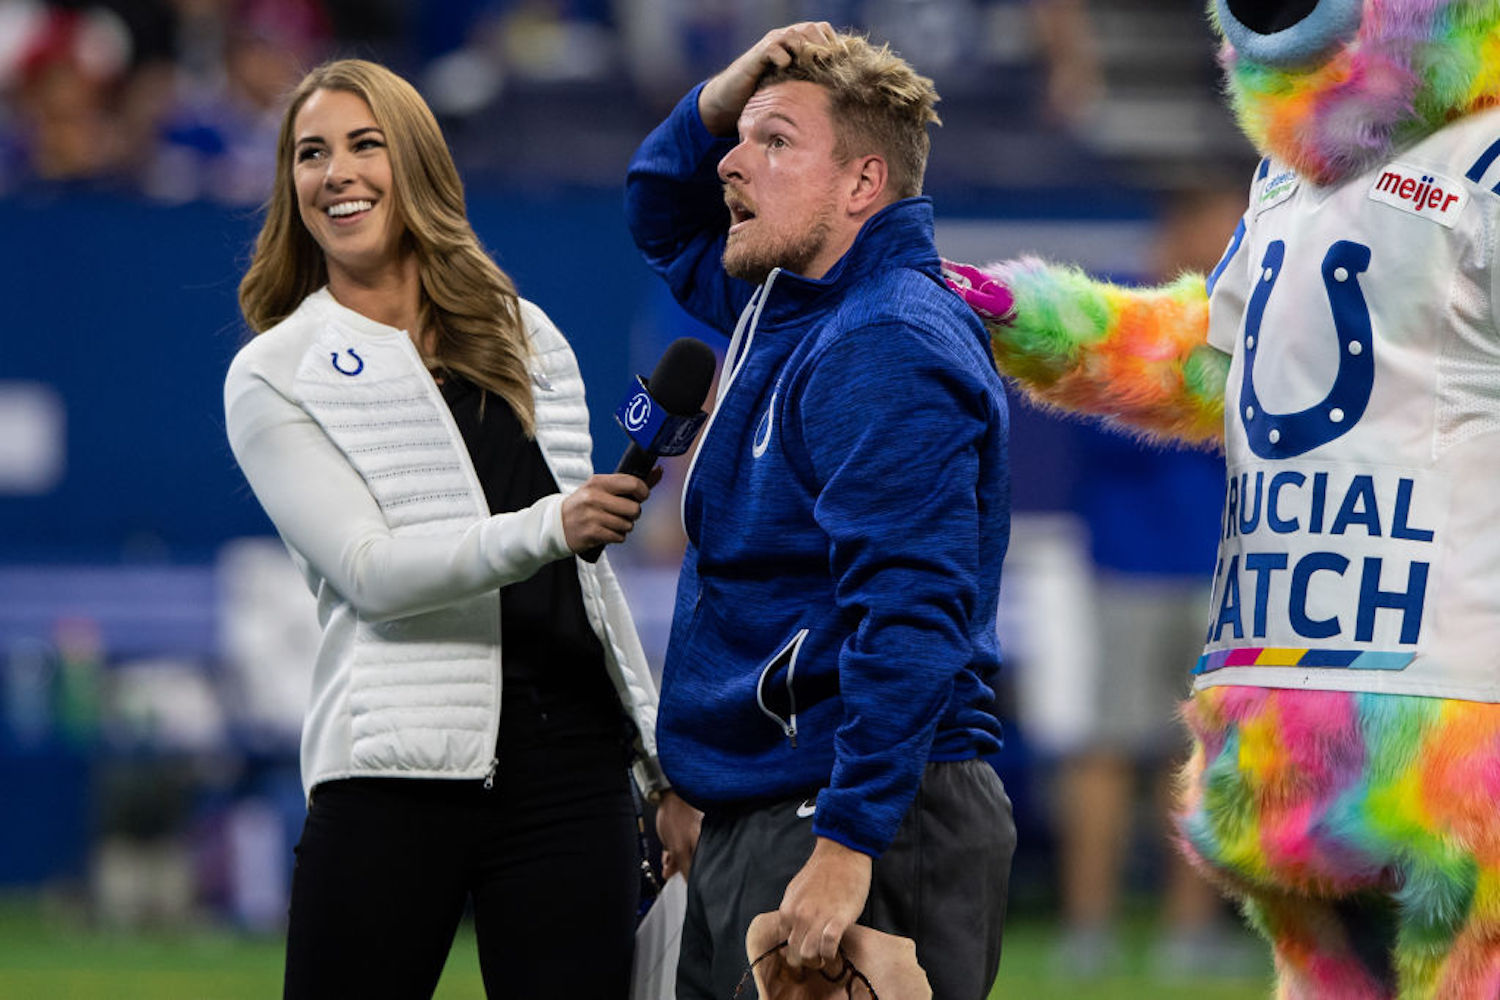 Pat McAfee was one of the best punters in the NFL at one point, but he once missed the kicking net so badly it almost killed a team doctor.